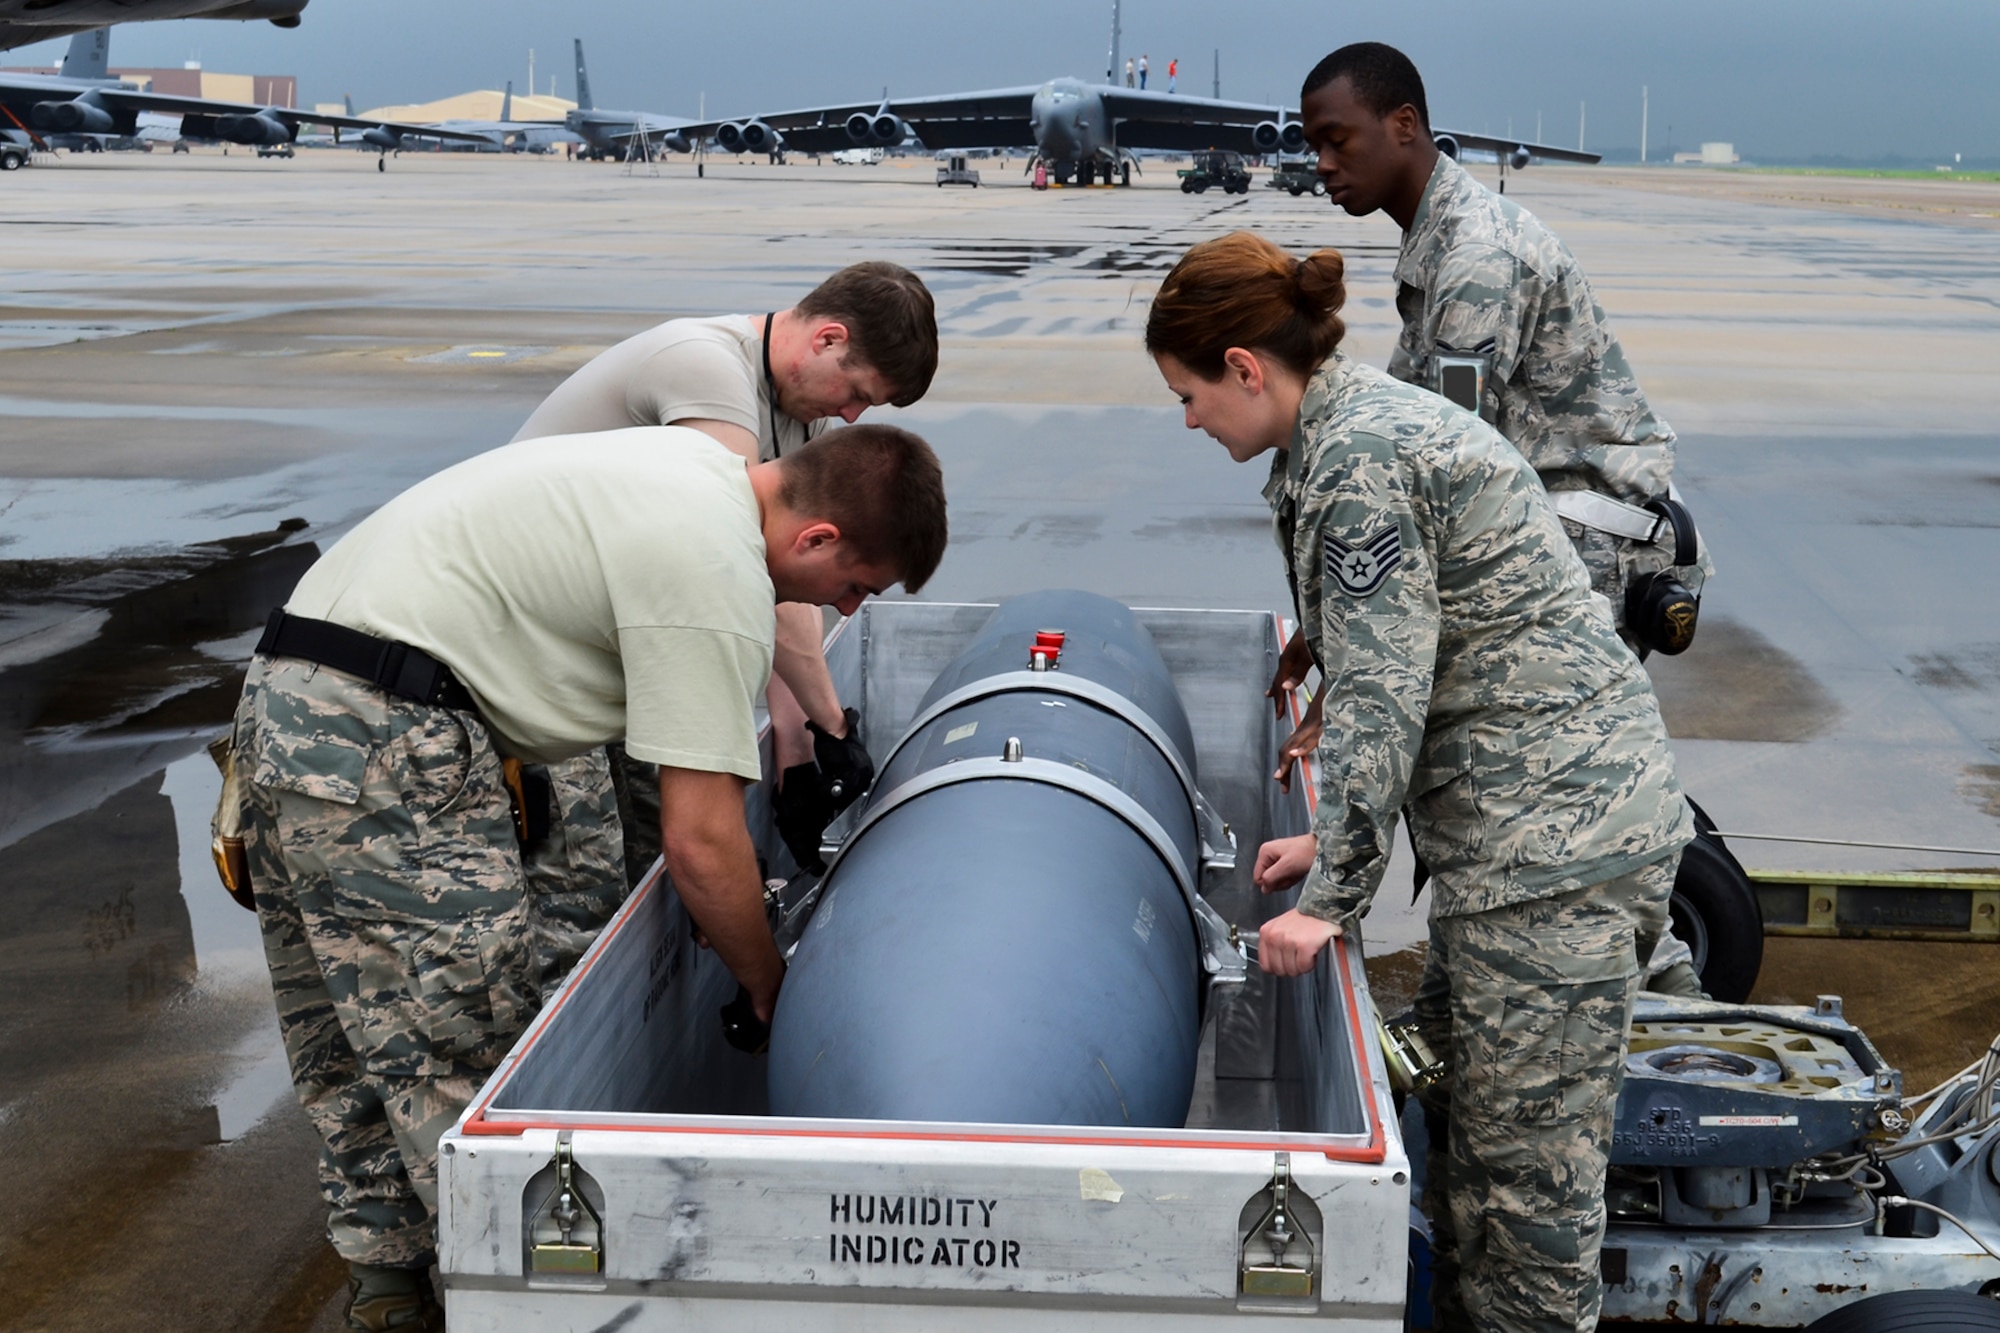 Weapons technicians assigned to the 2nd Aircraft Maintenance Squadron prepare an AN/ASQ-236 Radar Pod for loading onto a B-52H Stratofortress, April 14, 2014, Barksdale Air Force Base, Louisiana. The pod is operational on the F-15E Strike Eagle and is undergoing B-52 testing at Barksdale. (U.S. Air Force photo by Master Sgt. John Paxton/Released)